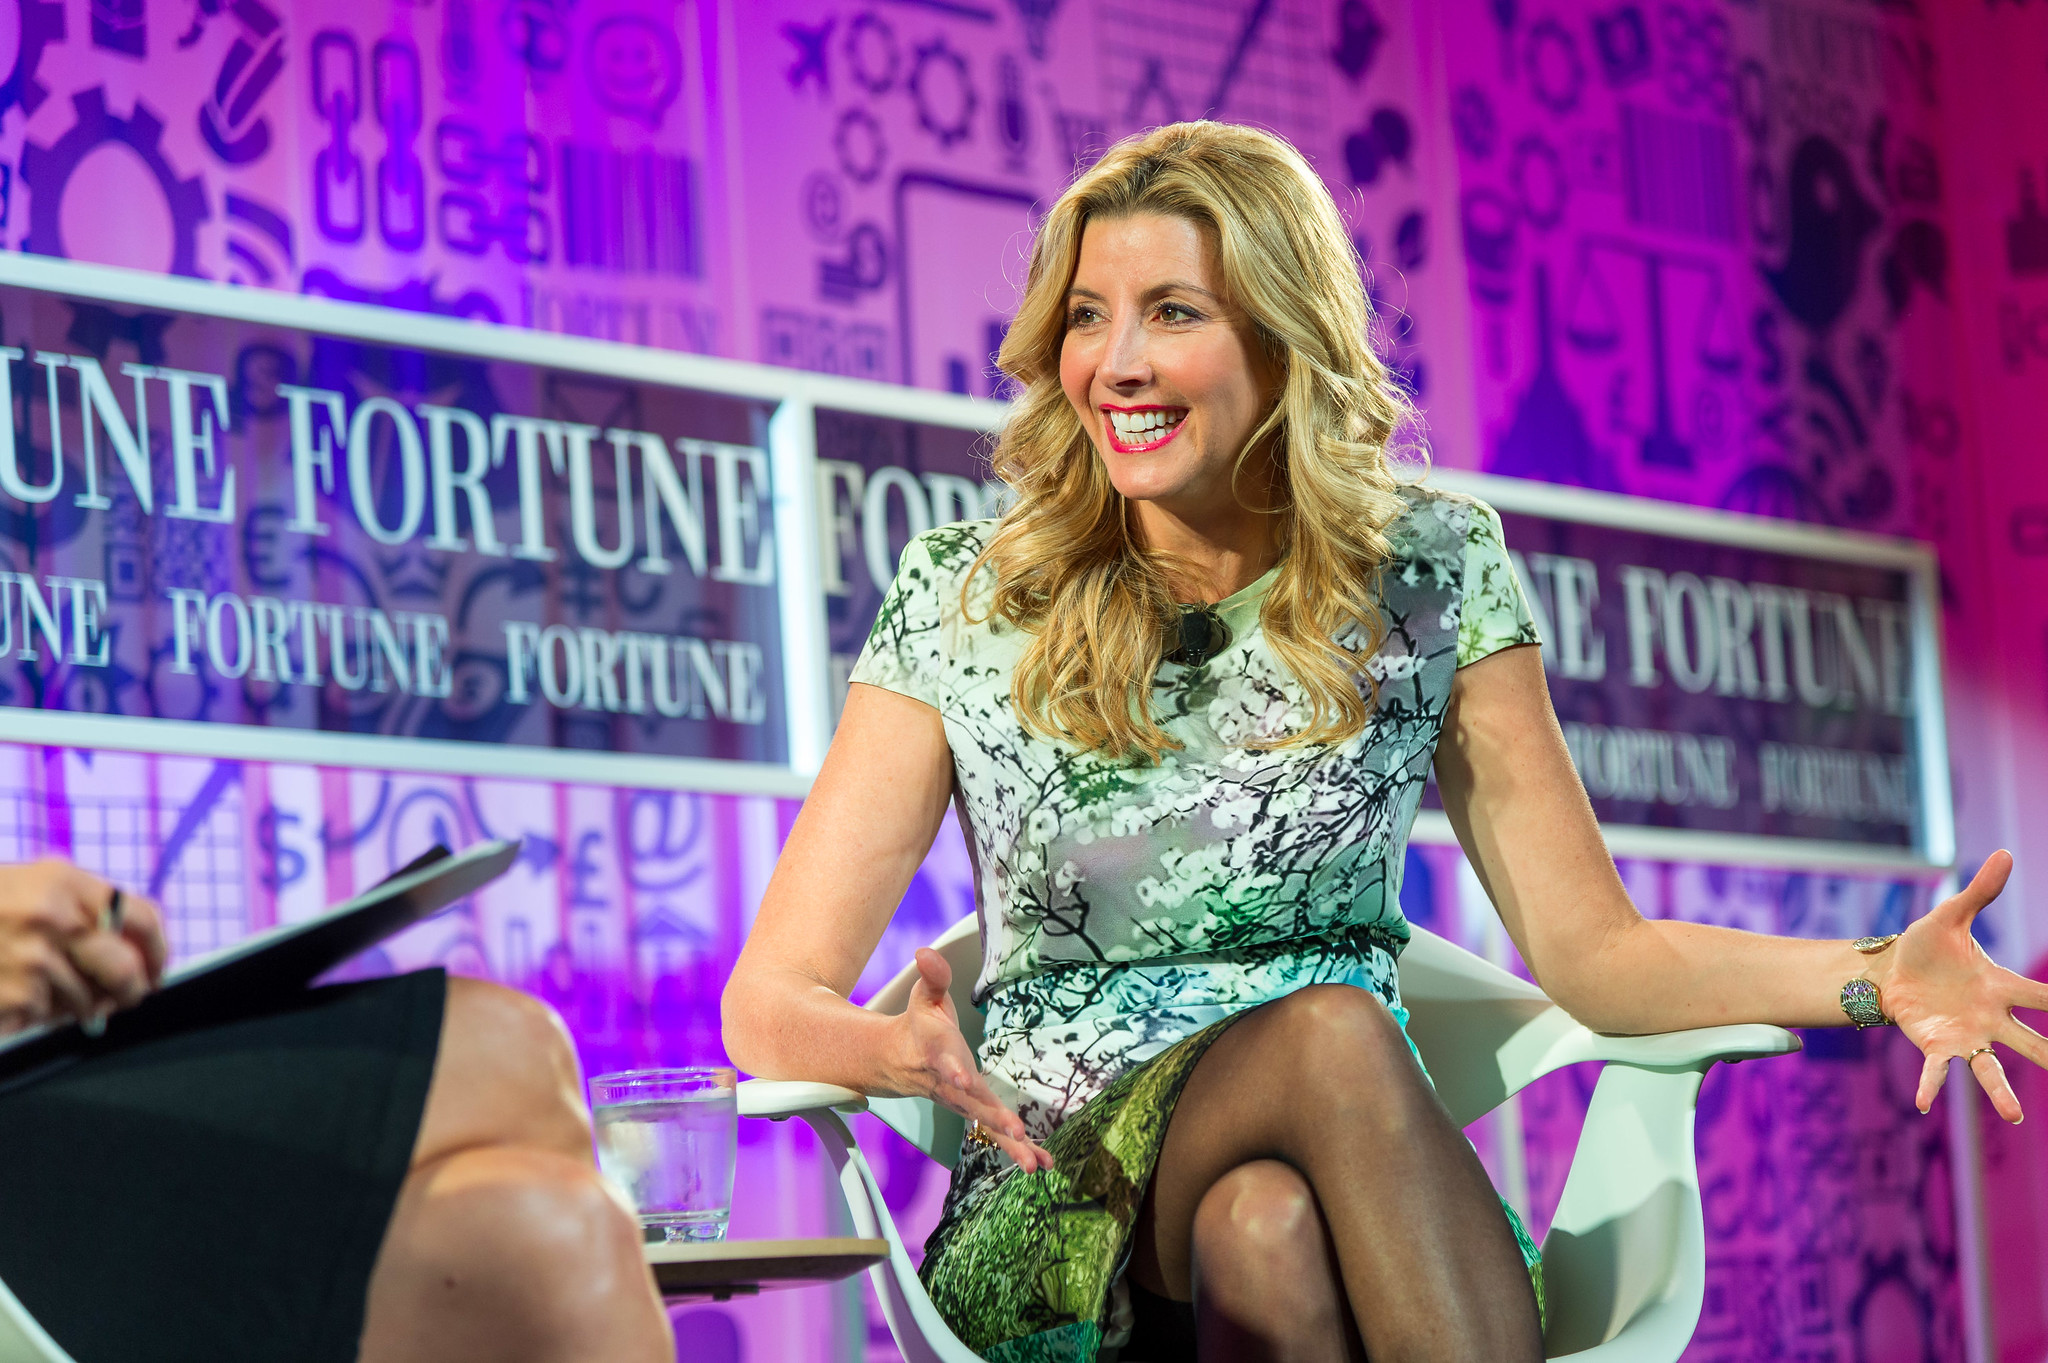 Billionaire Spanx founder: New attention is 'crazy